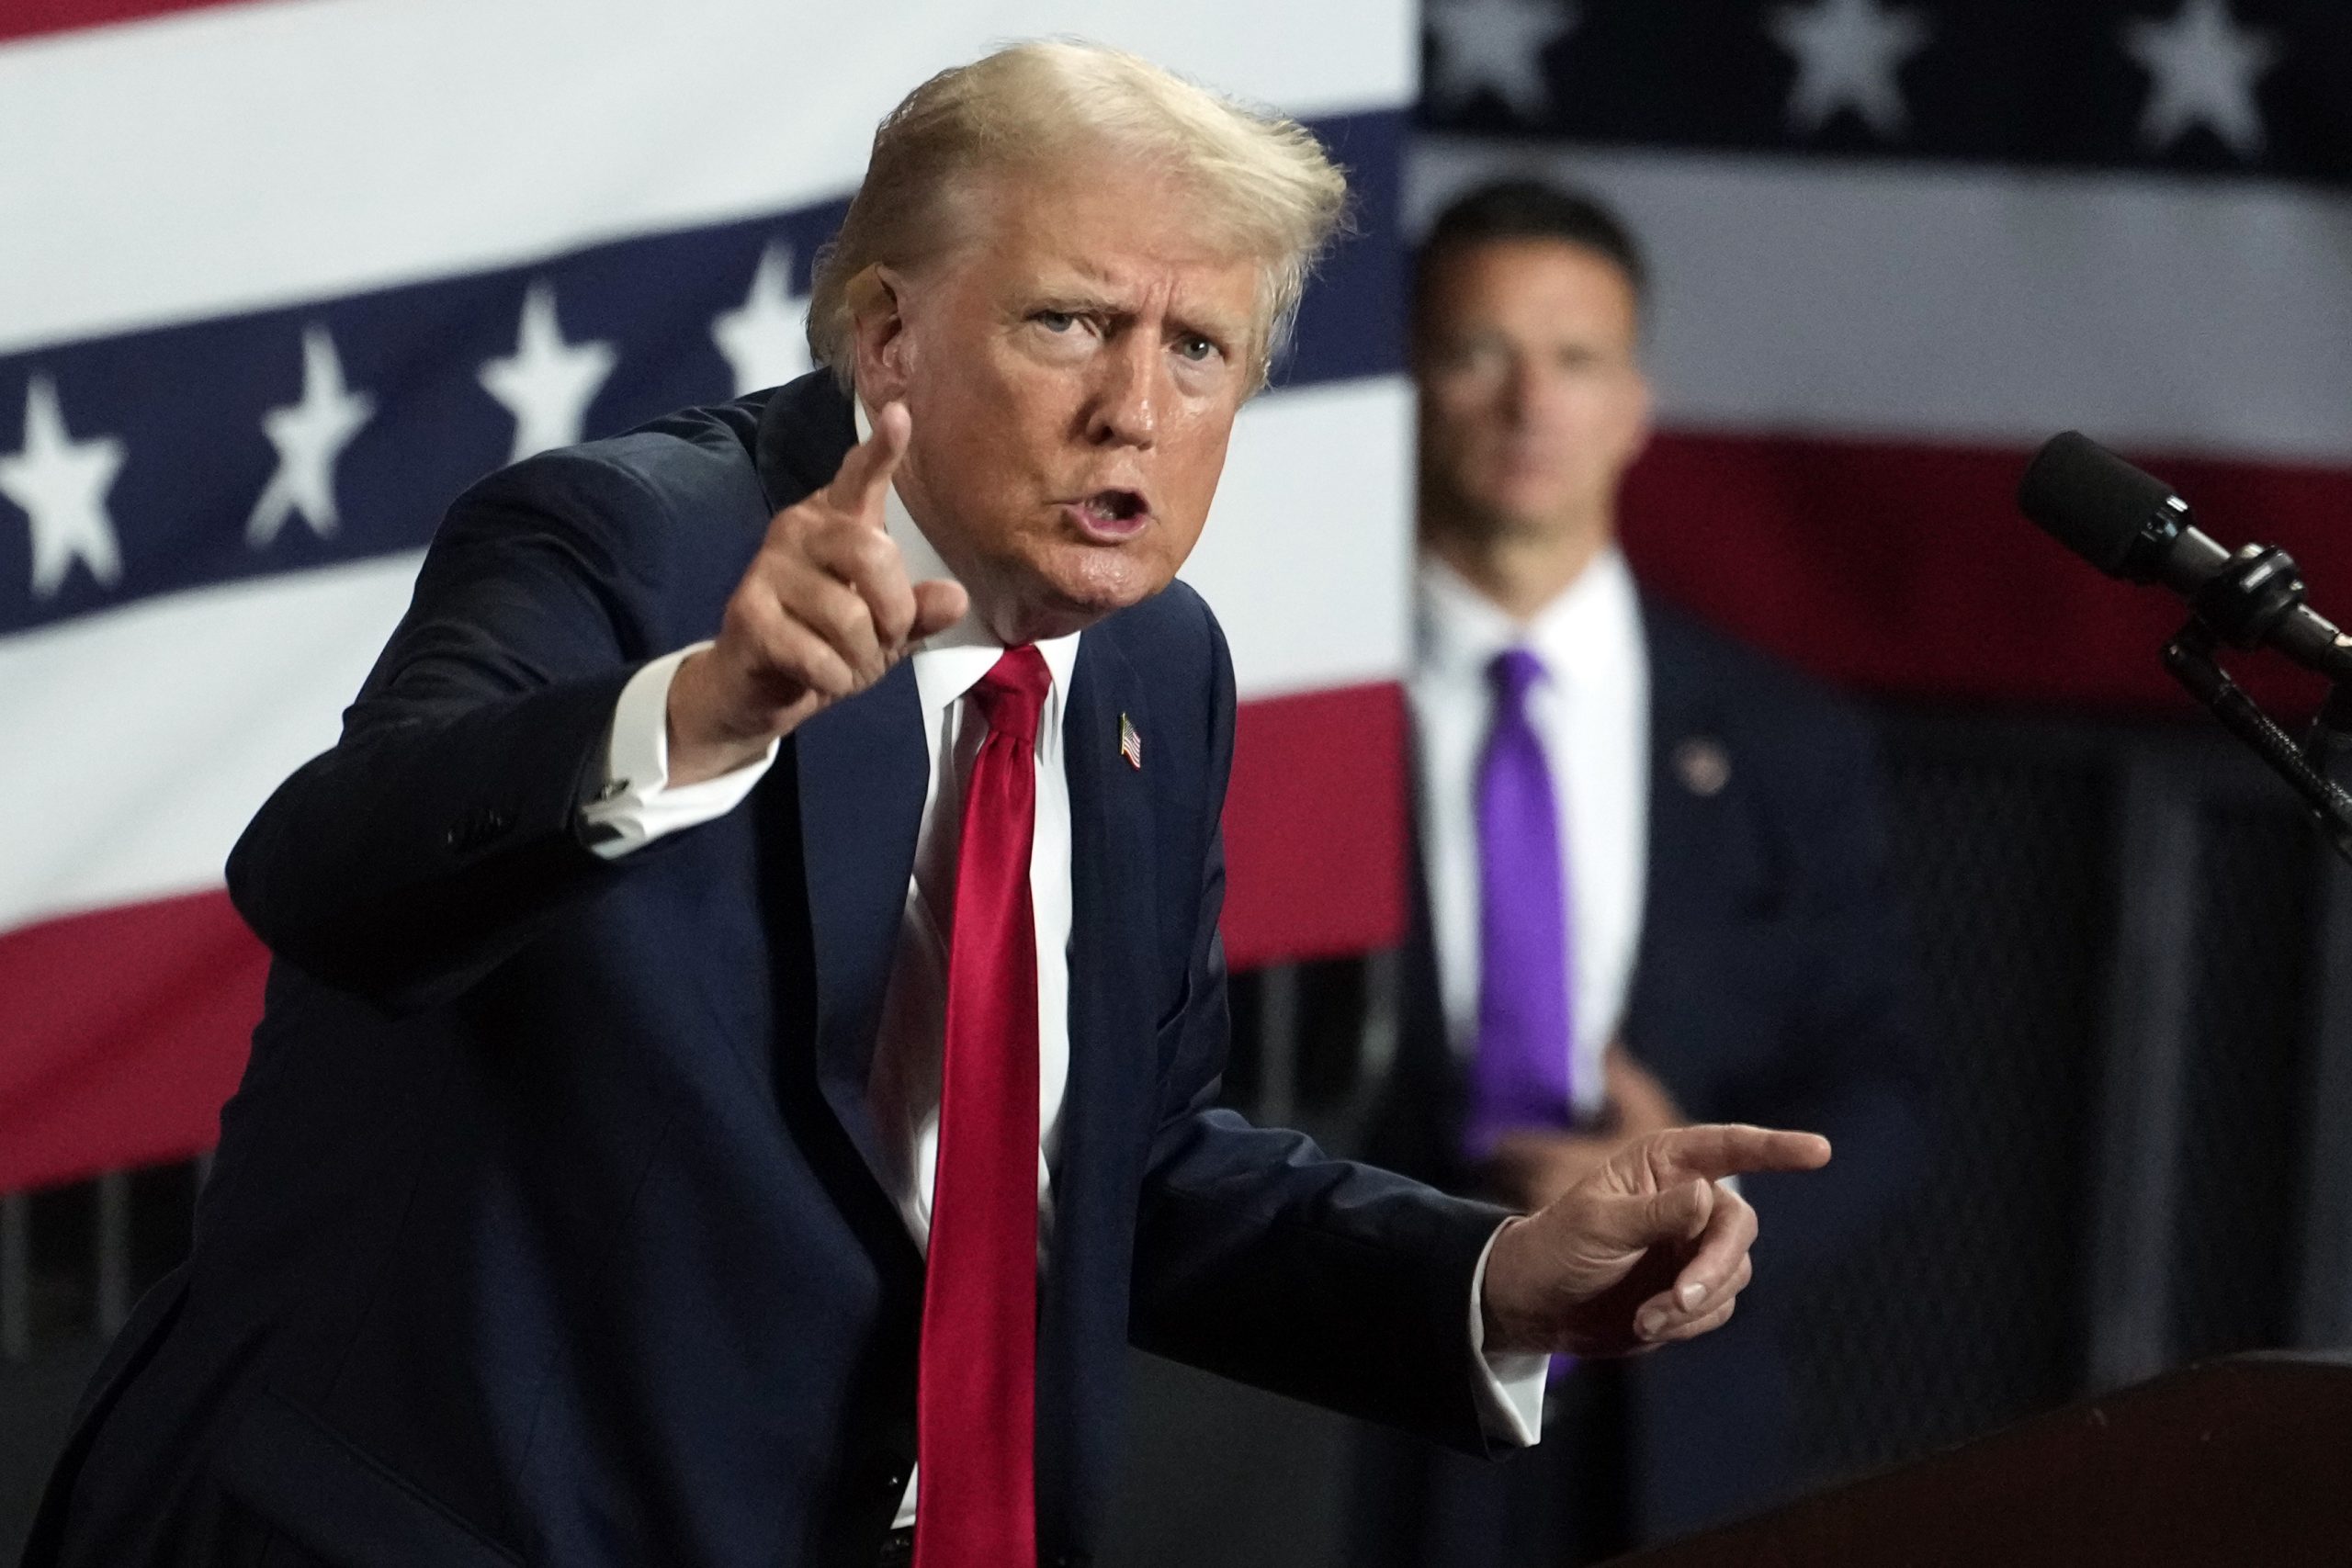 Trump Turns His Full Focus on Harris at First Rally Since Biden's Exit